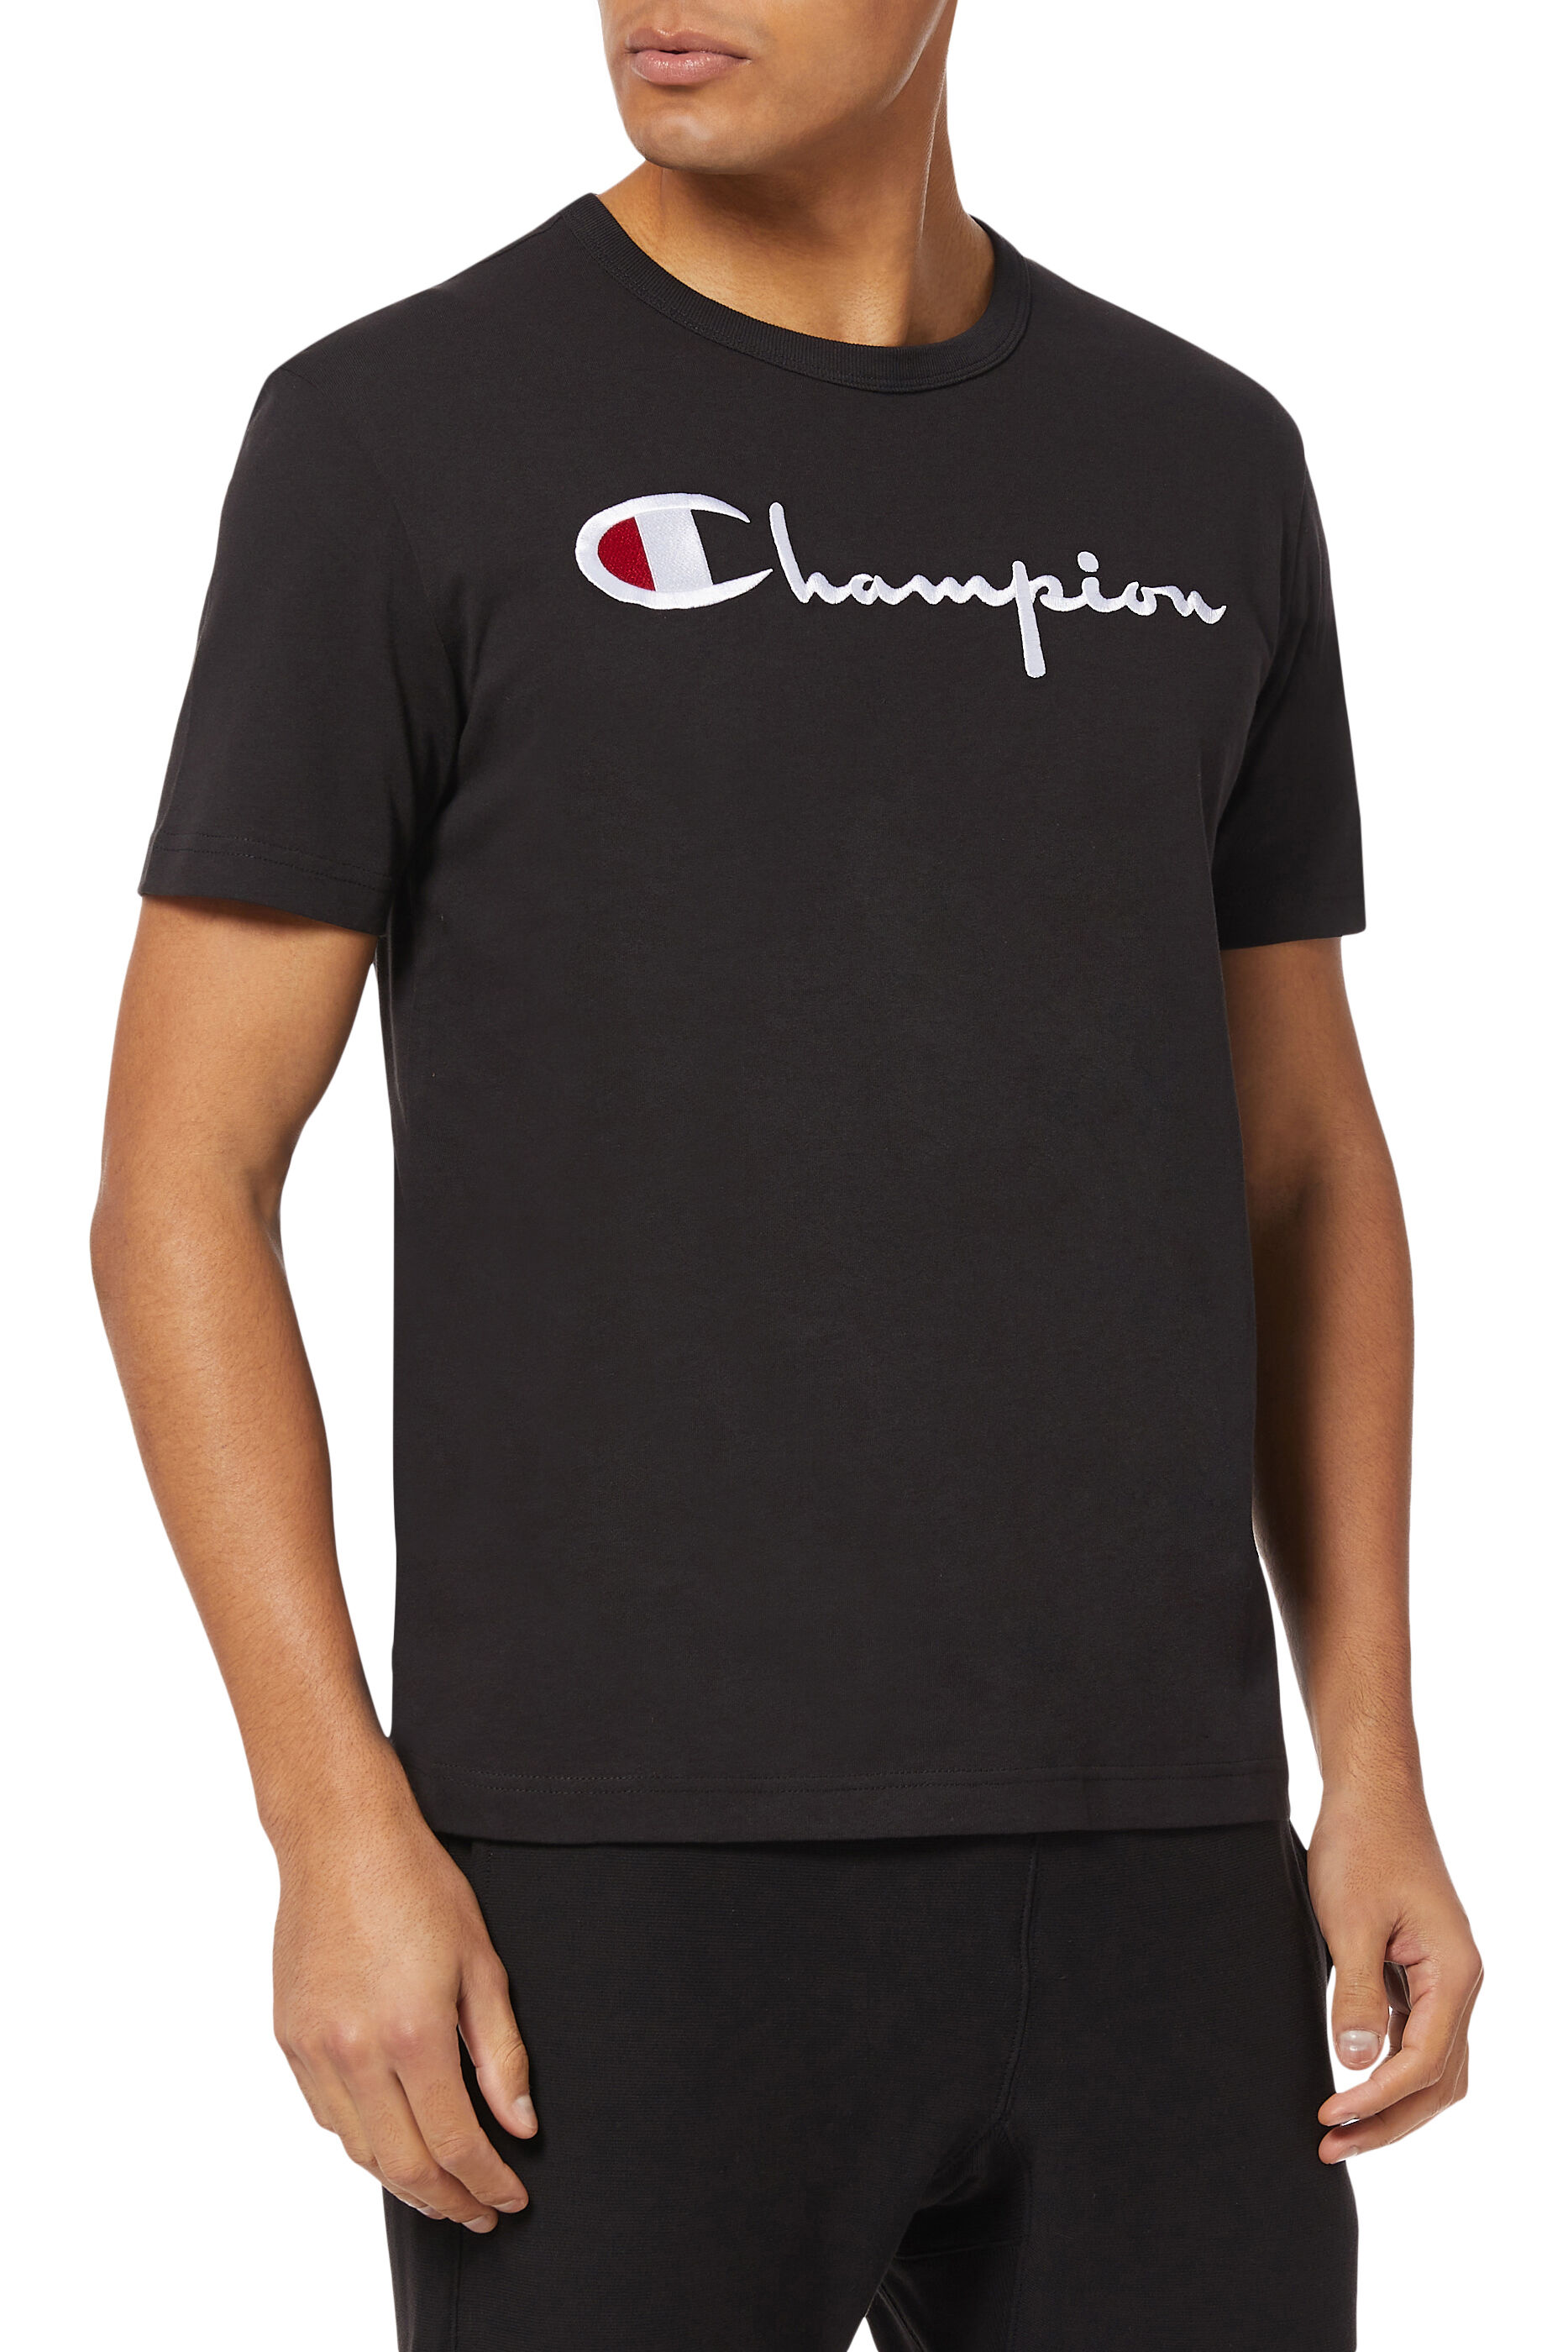 discounted champion clothing